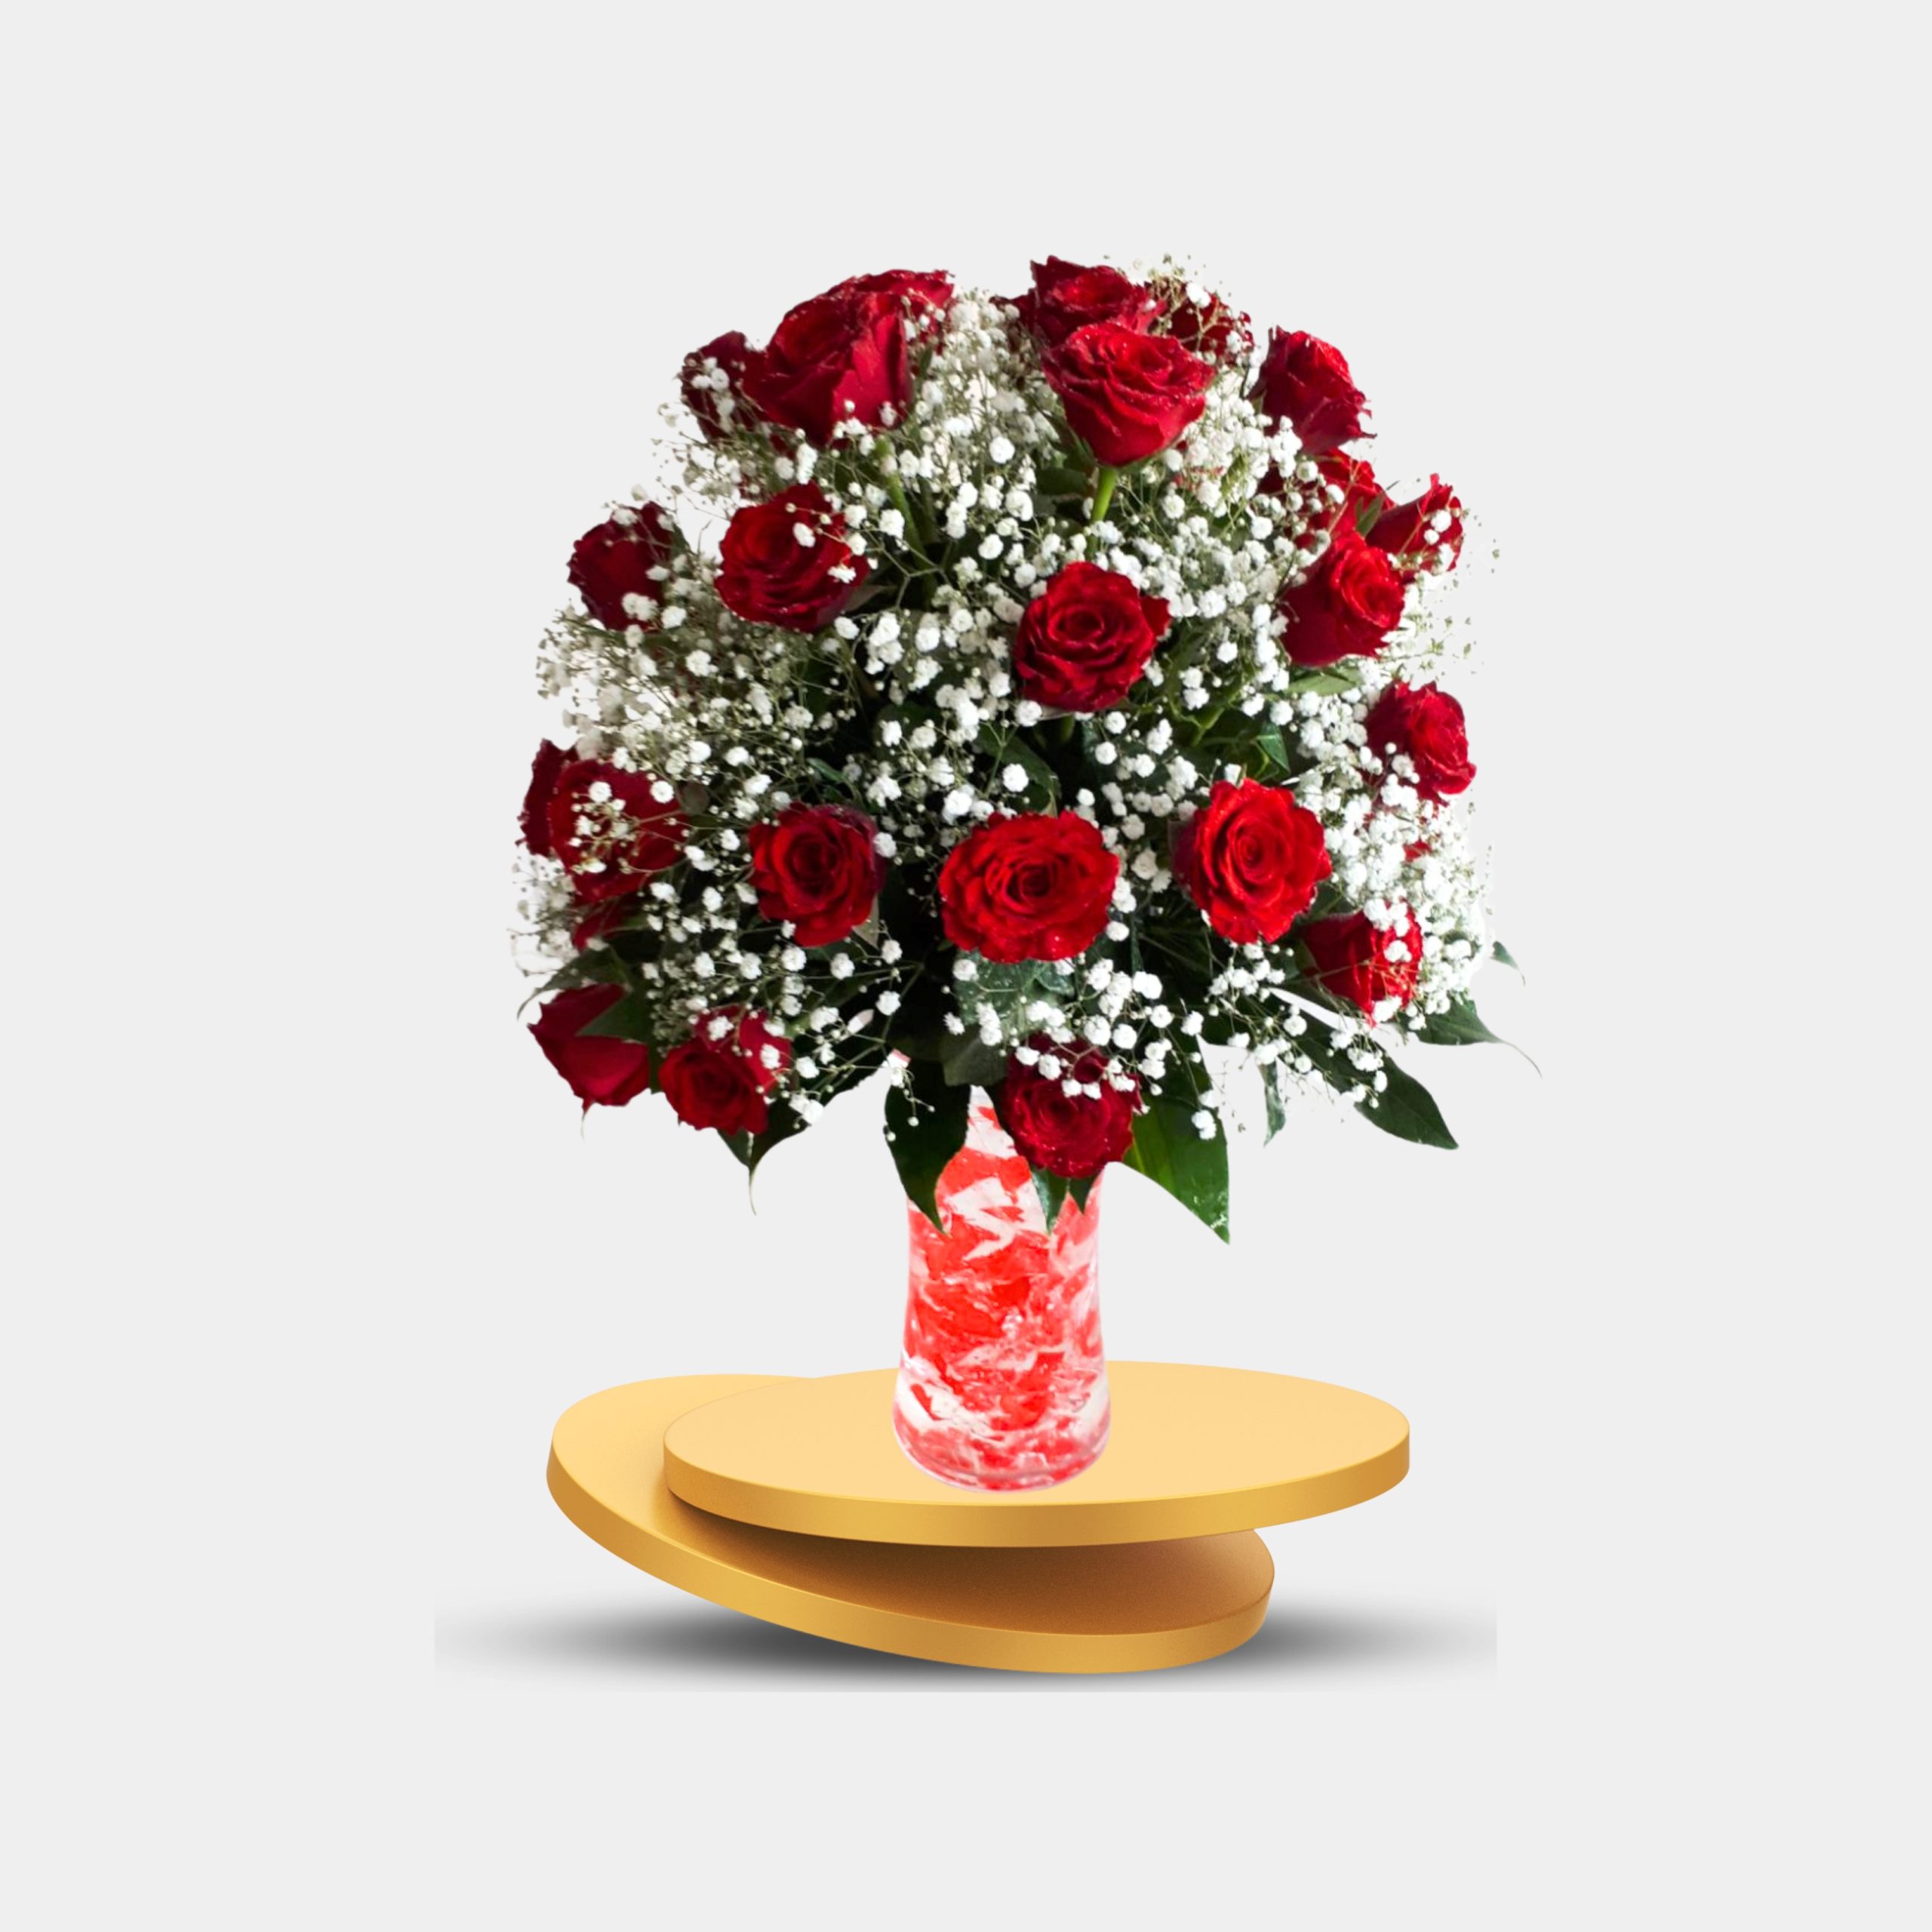 Valentines Day Flowers- Red Roses in Glass Vase